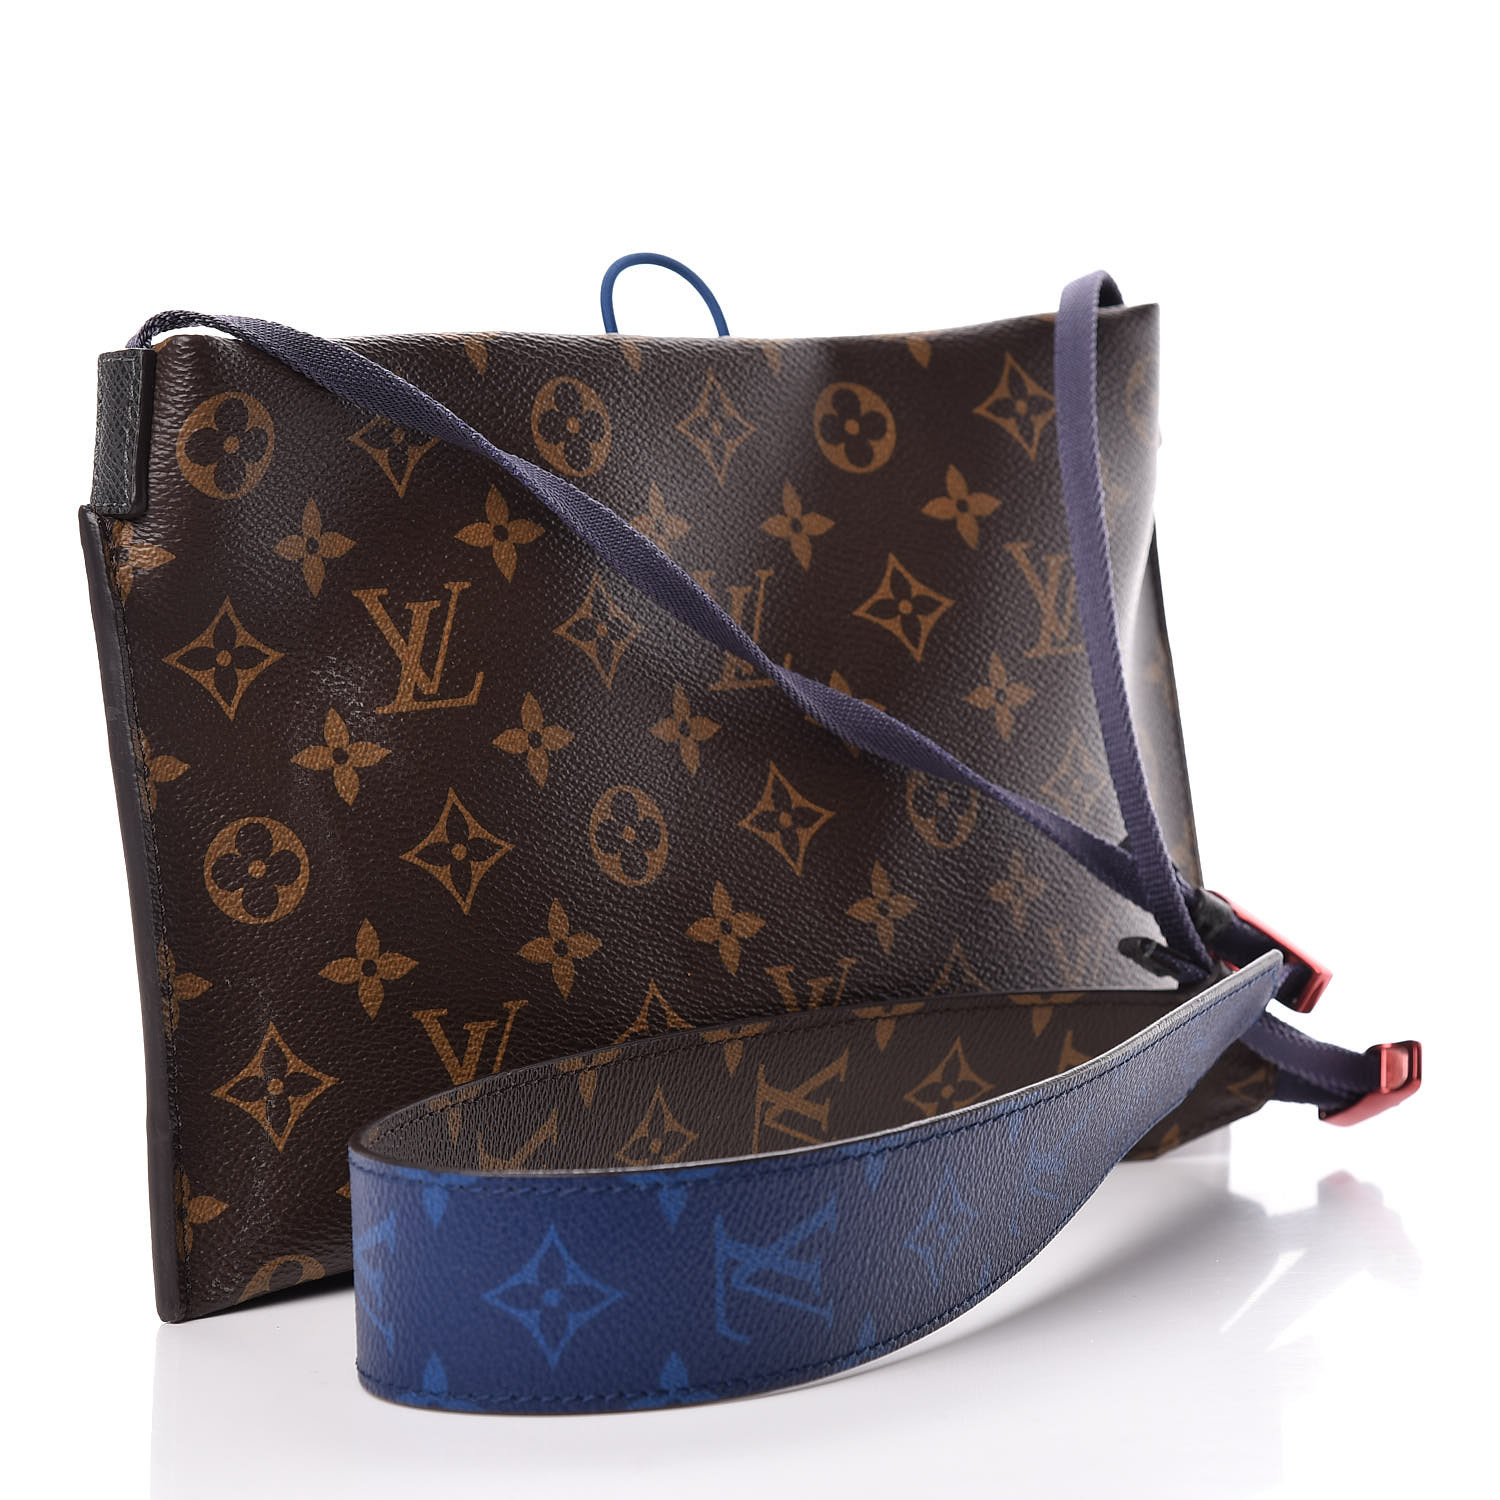 LOUIS VUITTON Monogram Small Outdoor Pouch Pacific Blue 457112